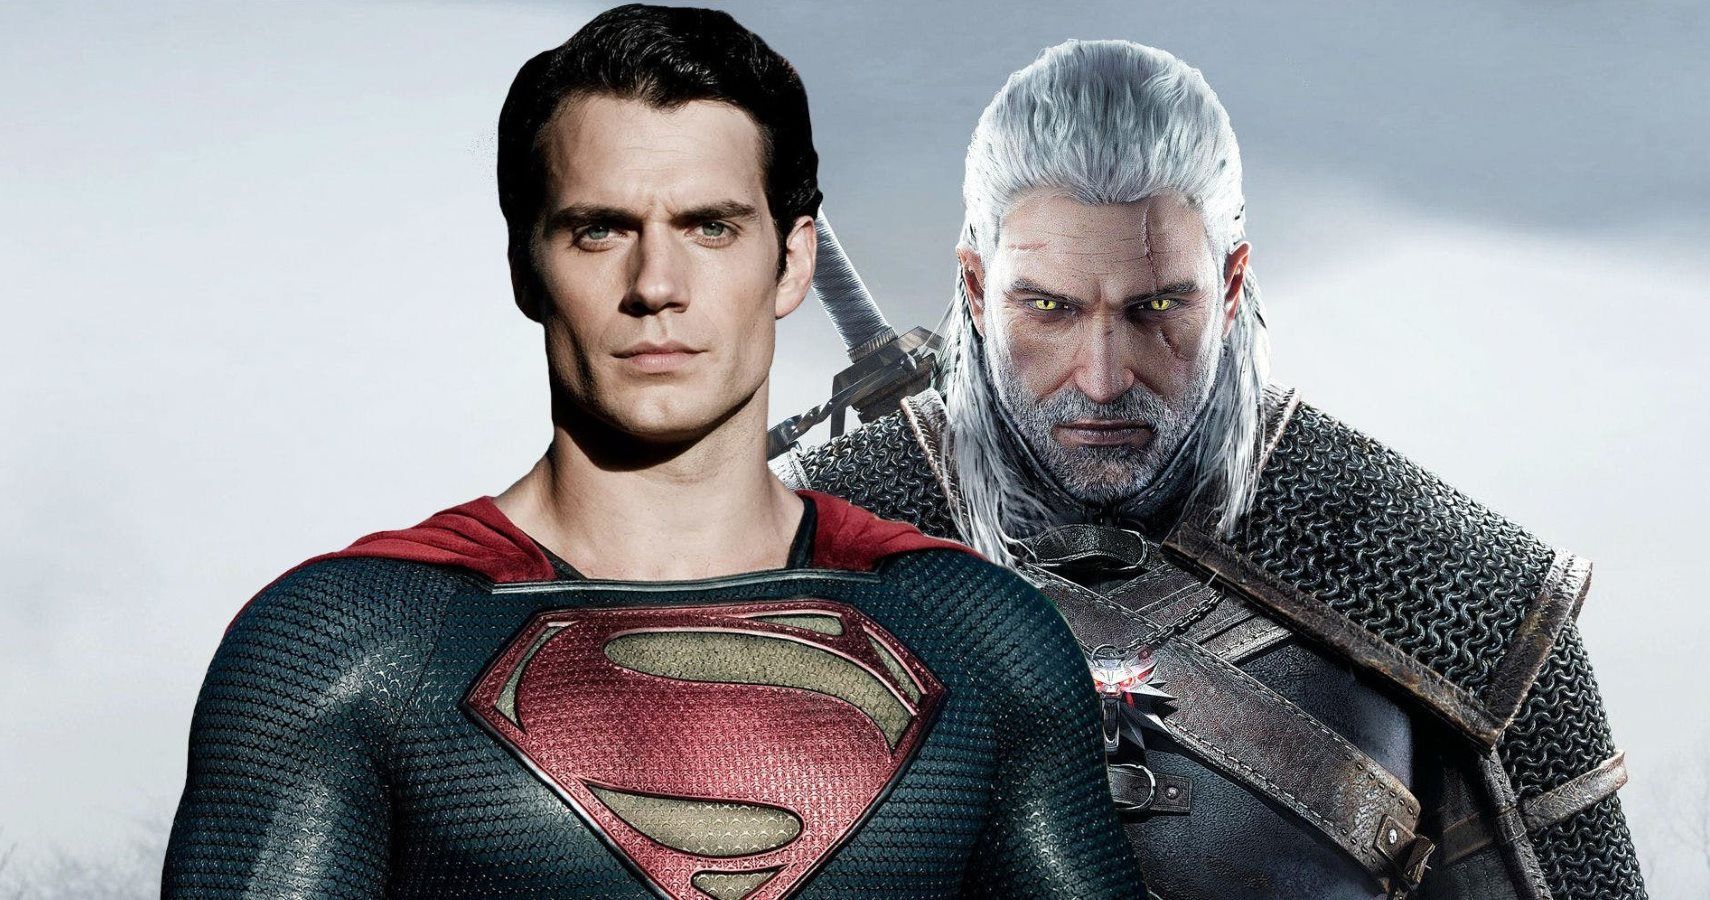 Confirmed: Henry Cavill To Play Geralt Of Rivia In The Witcher